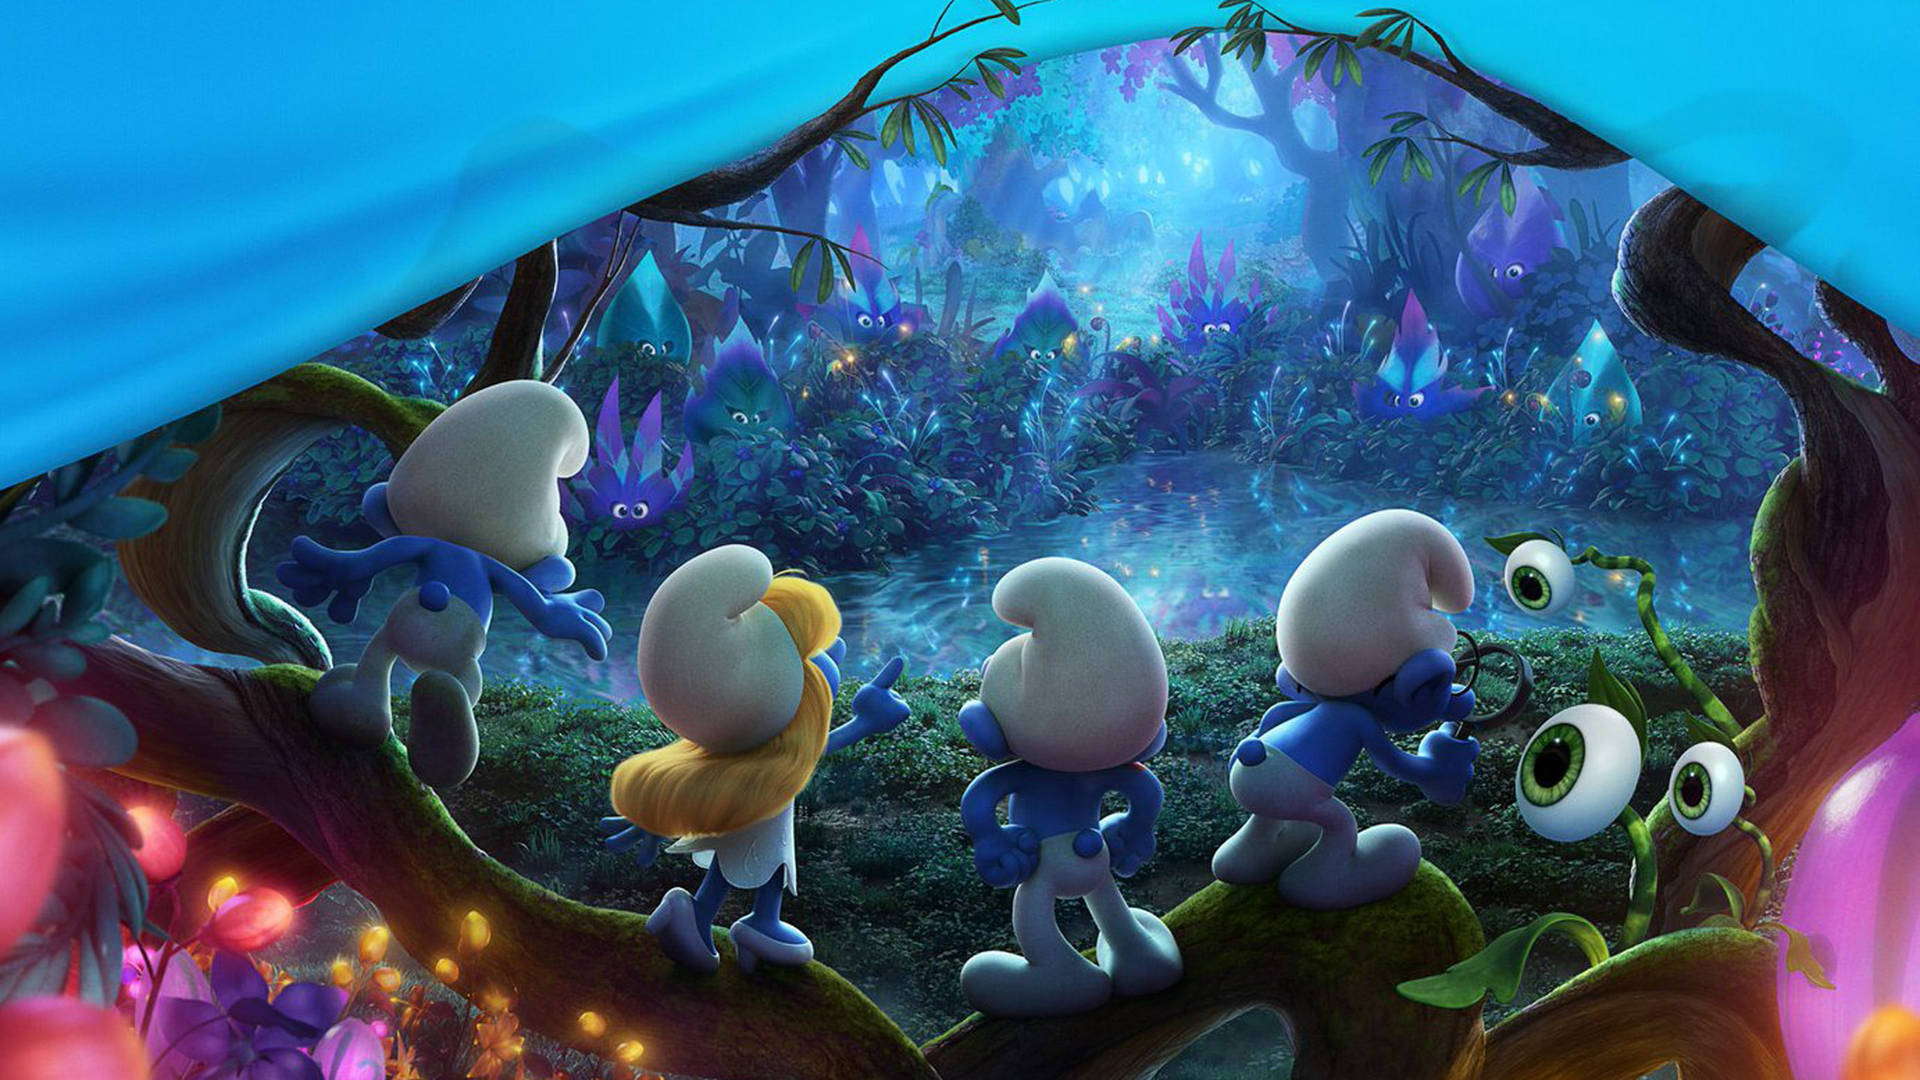 The Smurfs Magical Lost Village Wallpaper